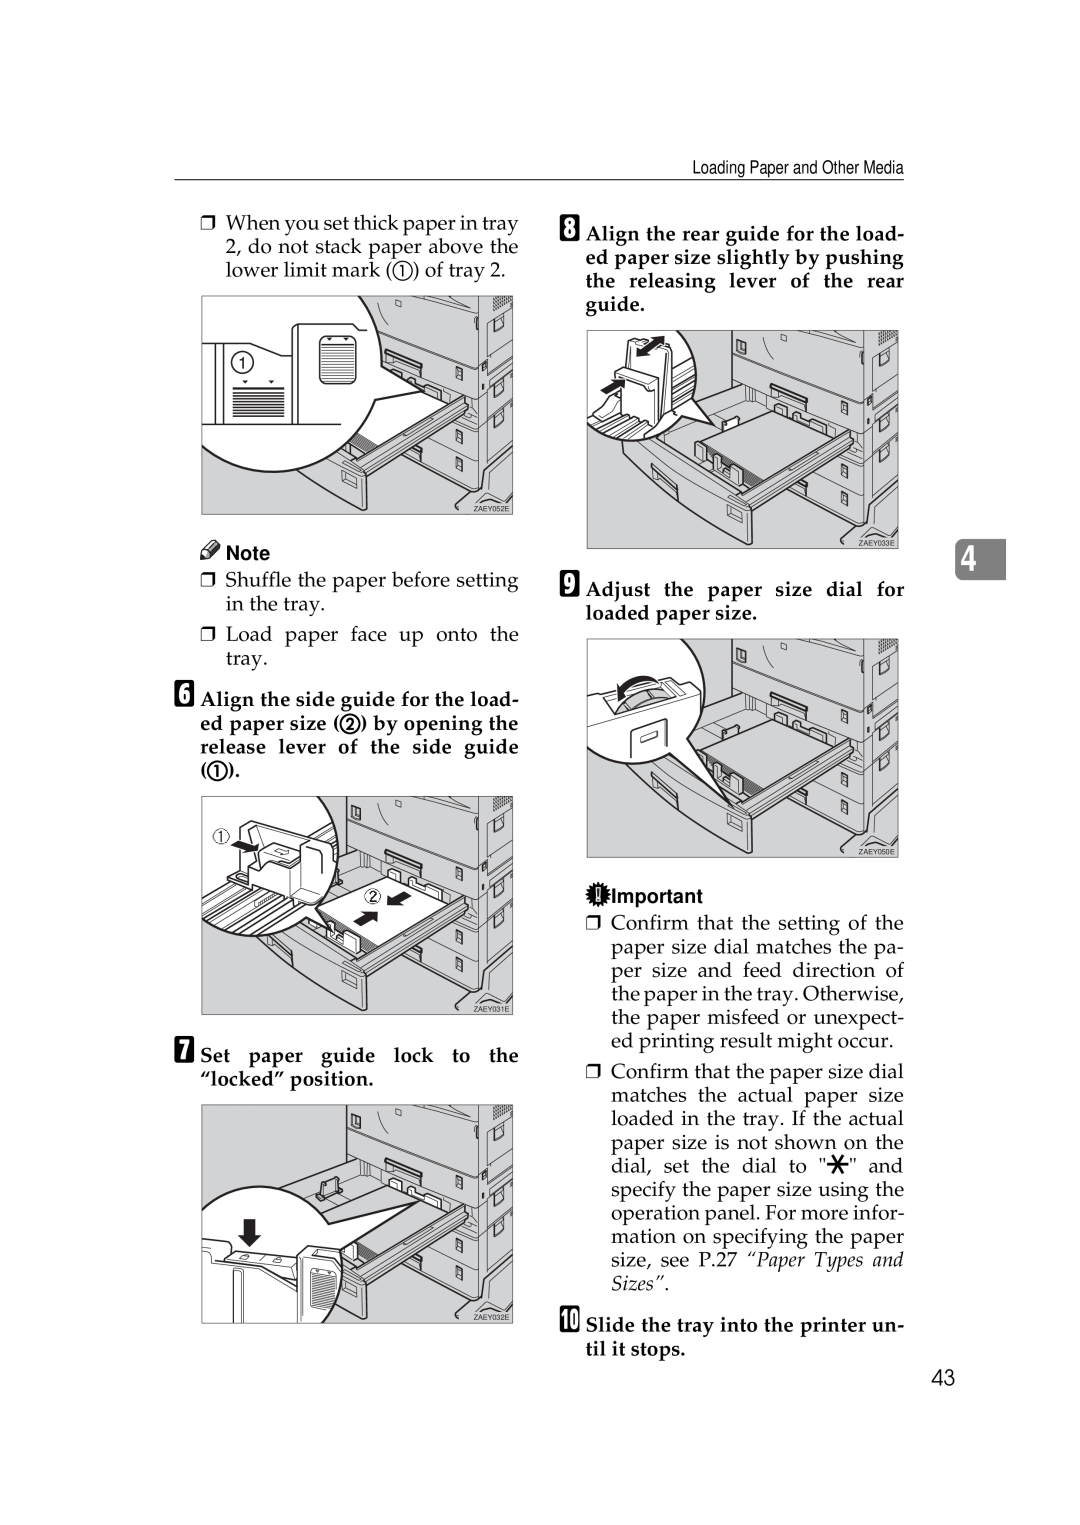 Ricoh Aficio AP2700 operating instructions G Set paper guide lock to the “locked” position 